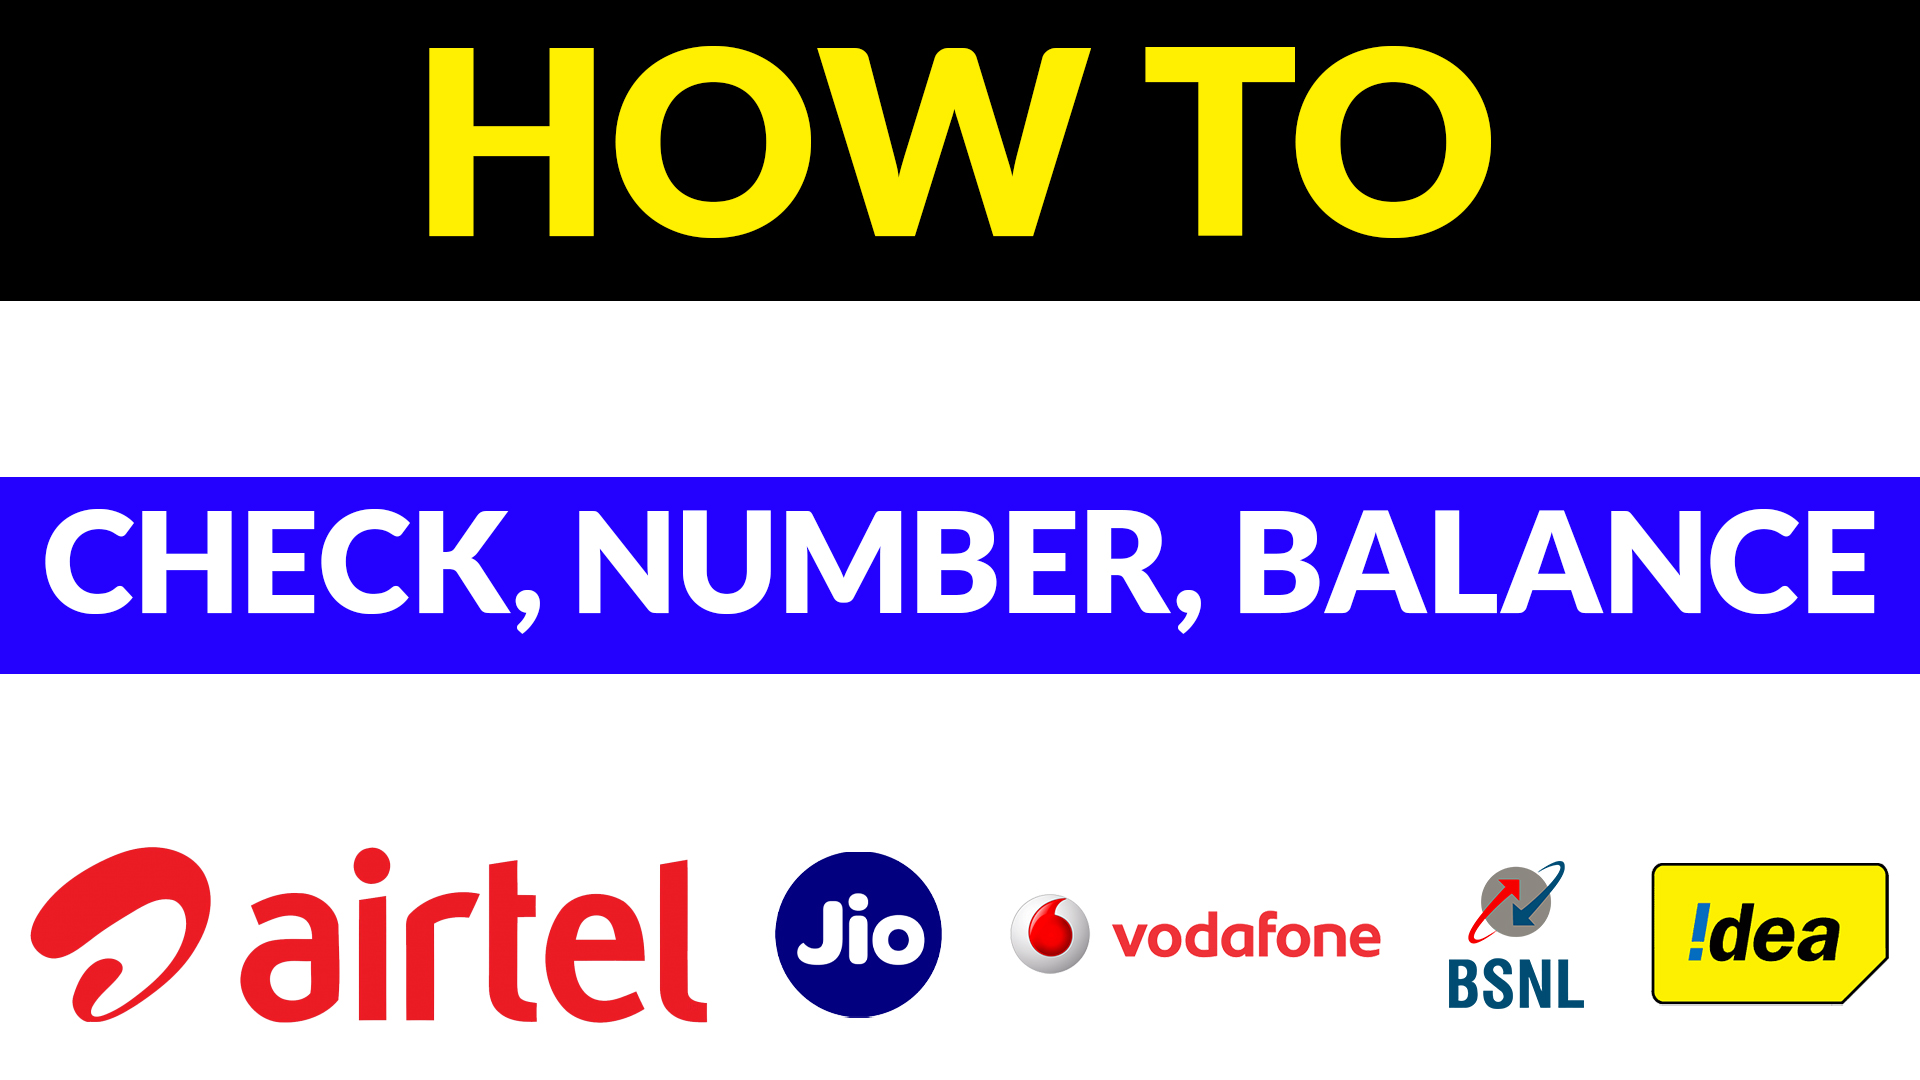 How To Check Jio Number